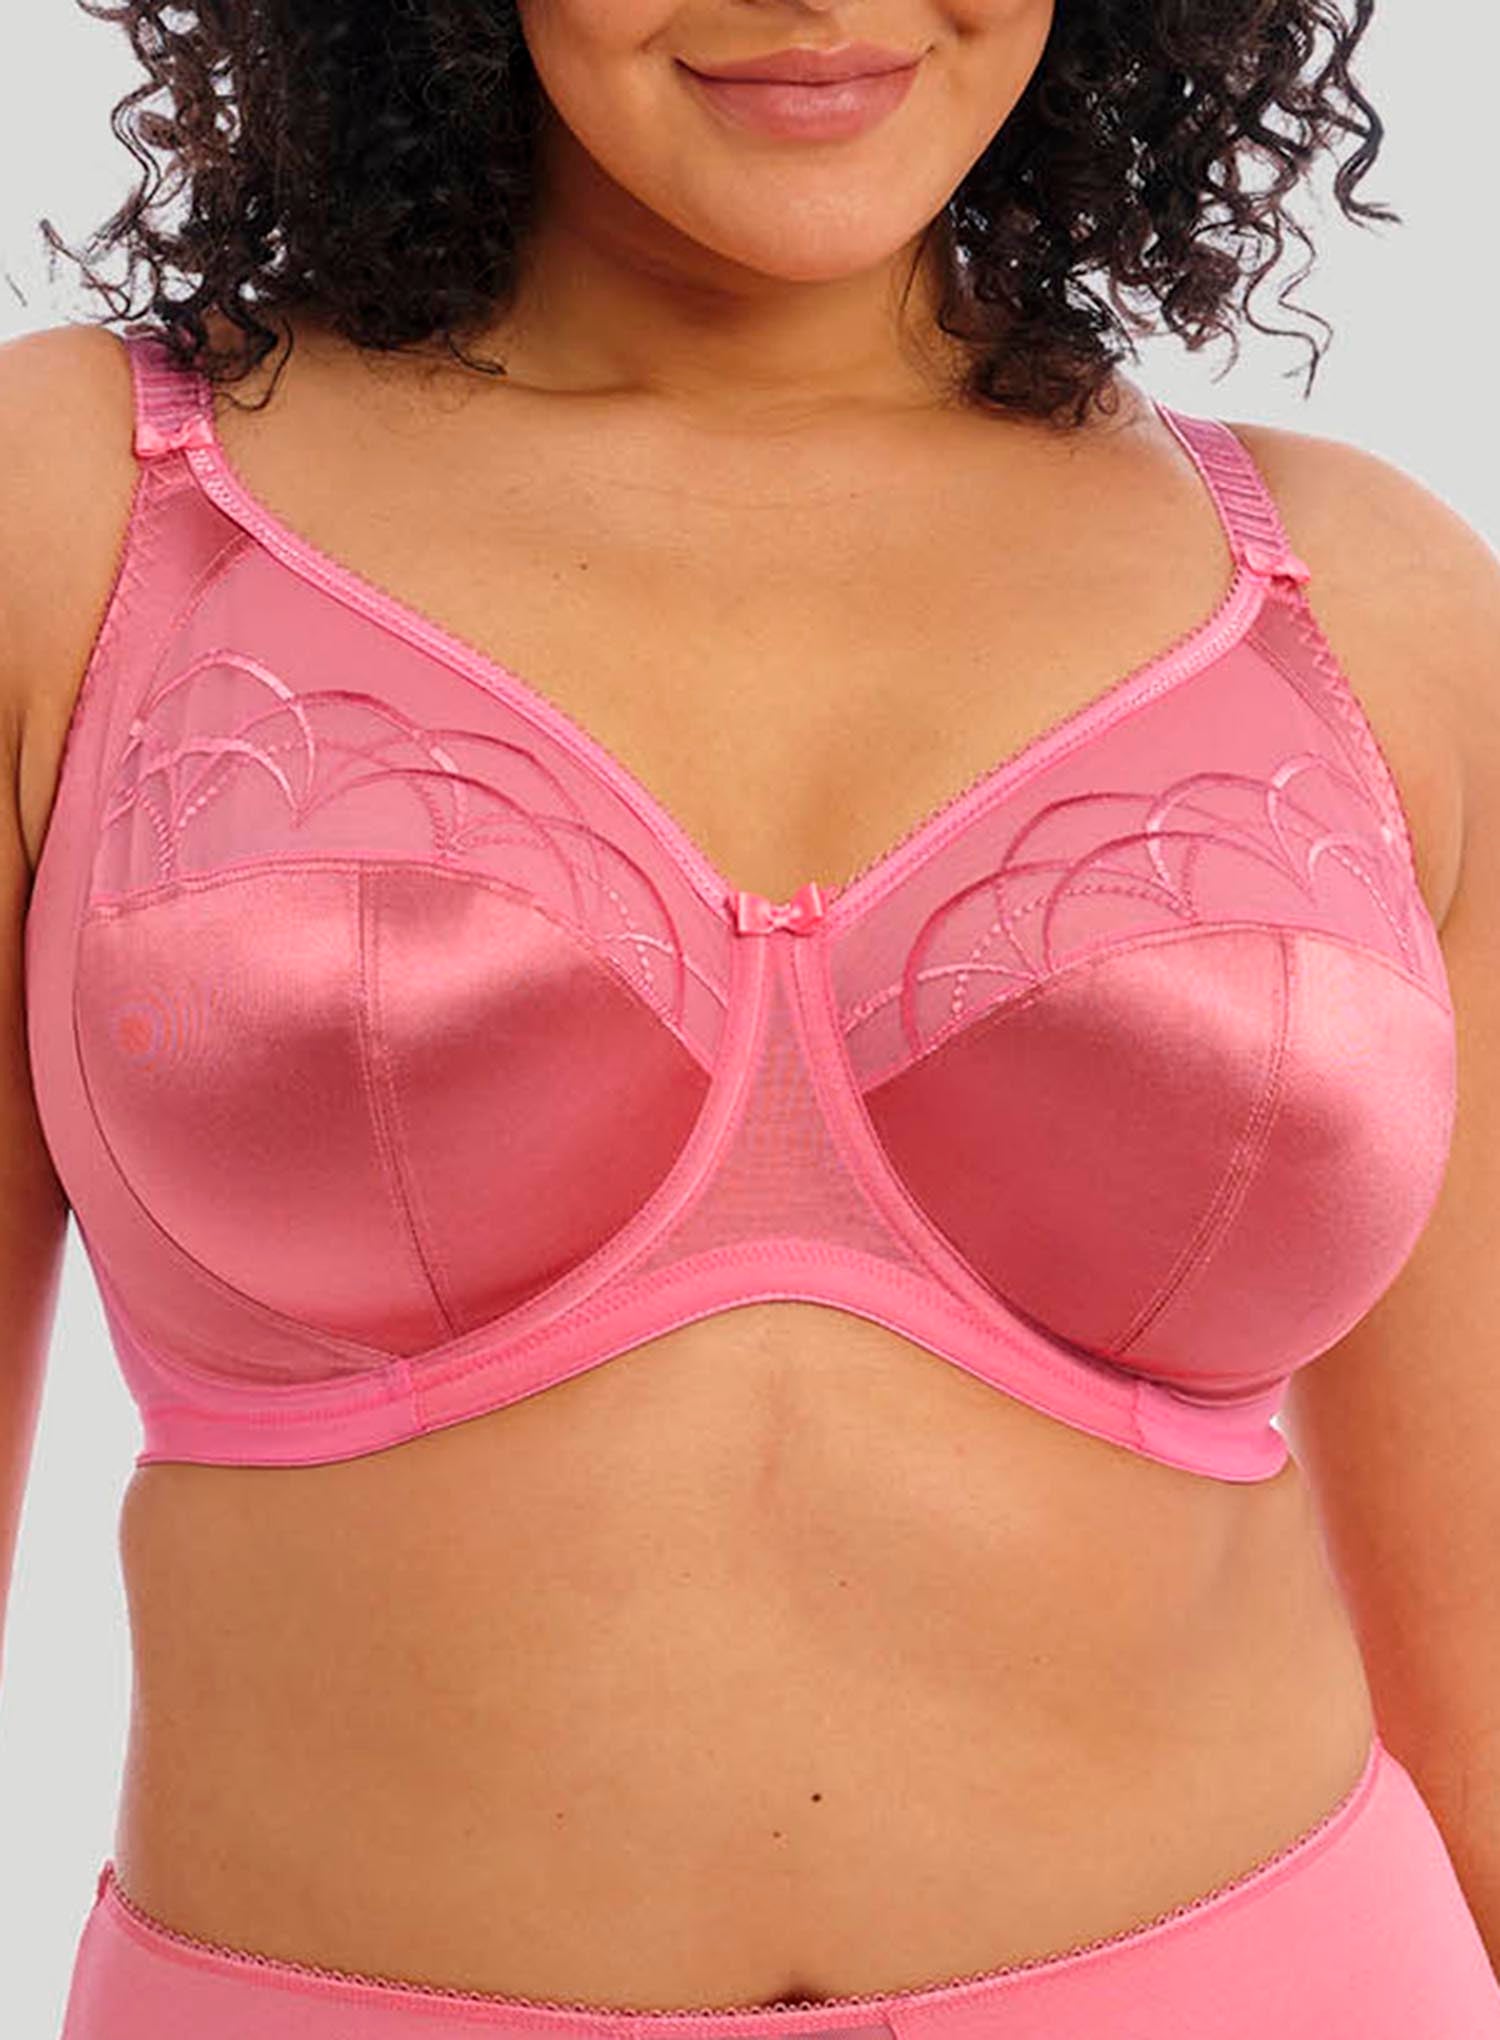 Elomi Cate Underwired Full Cup Banded Bra - White